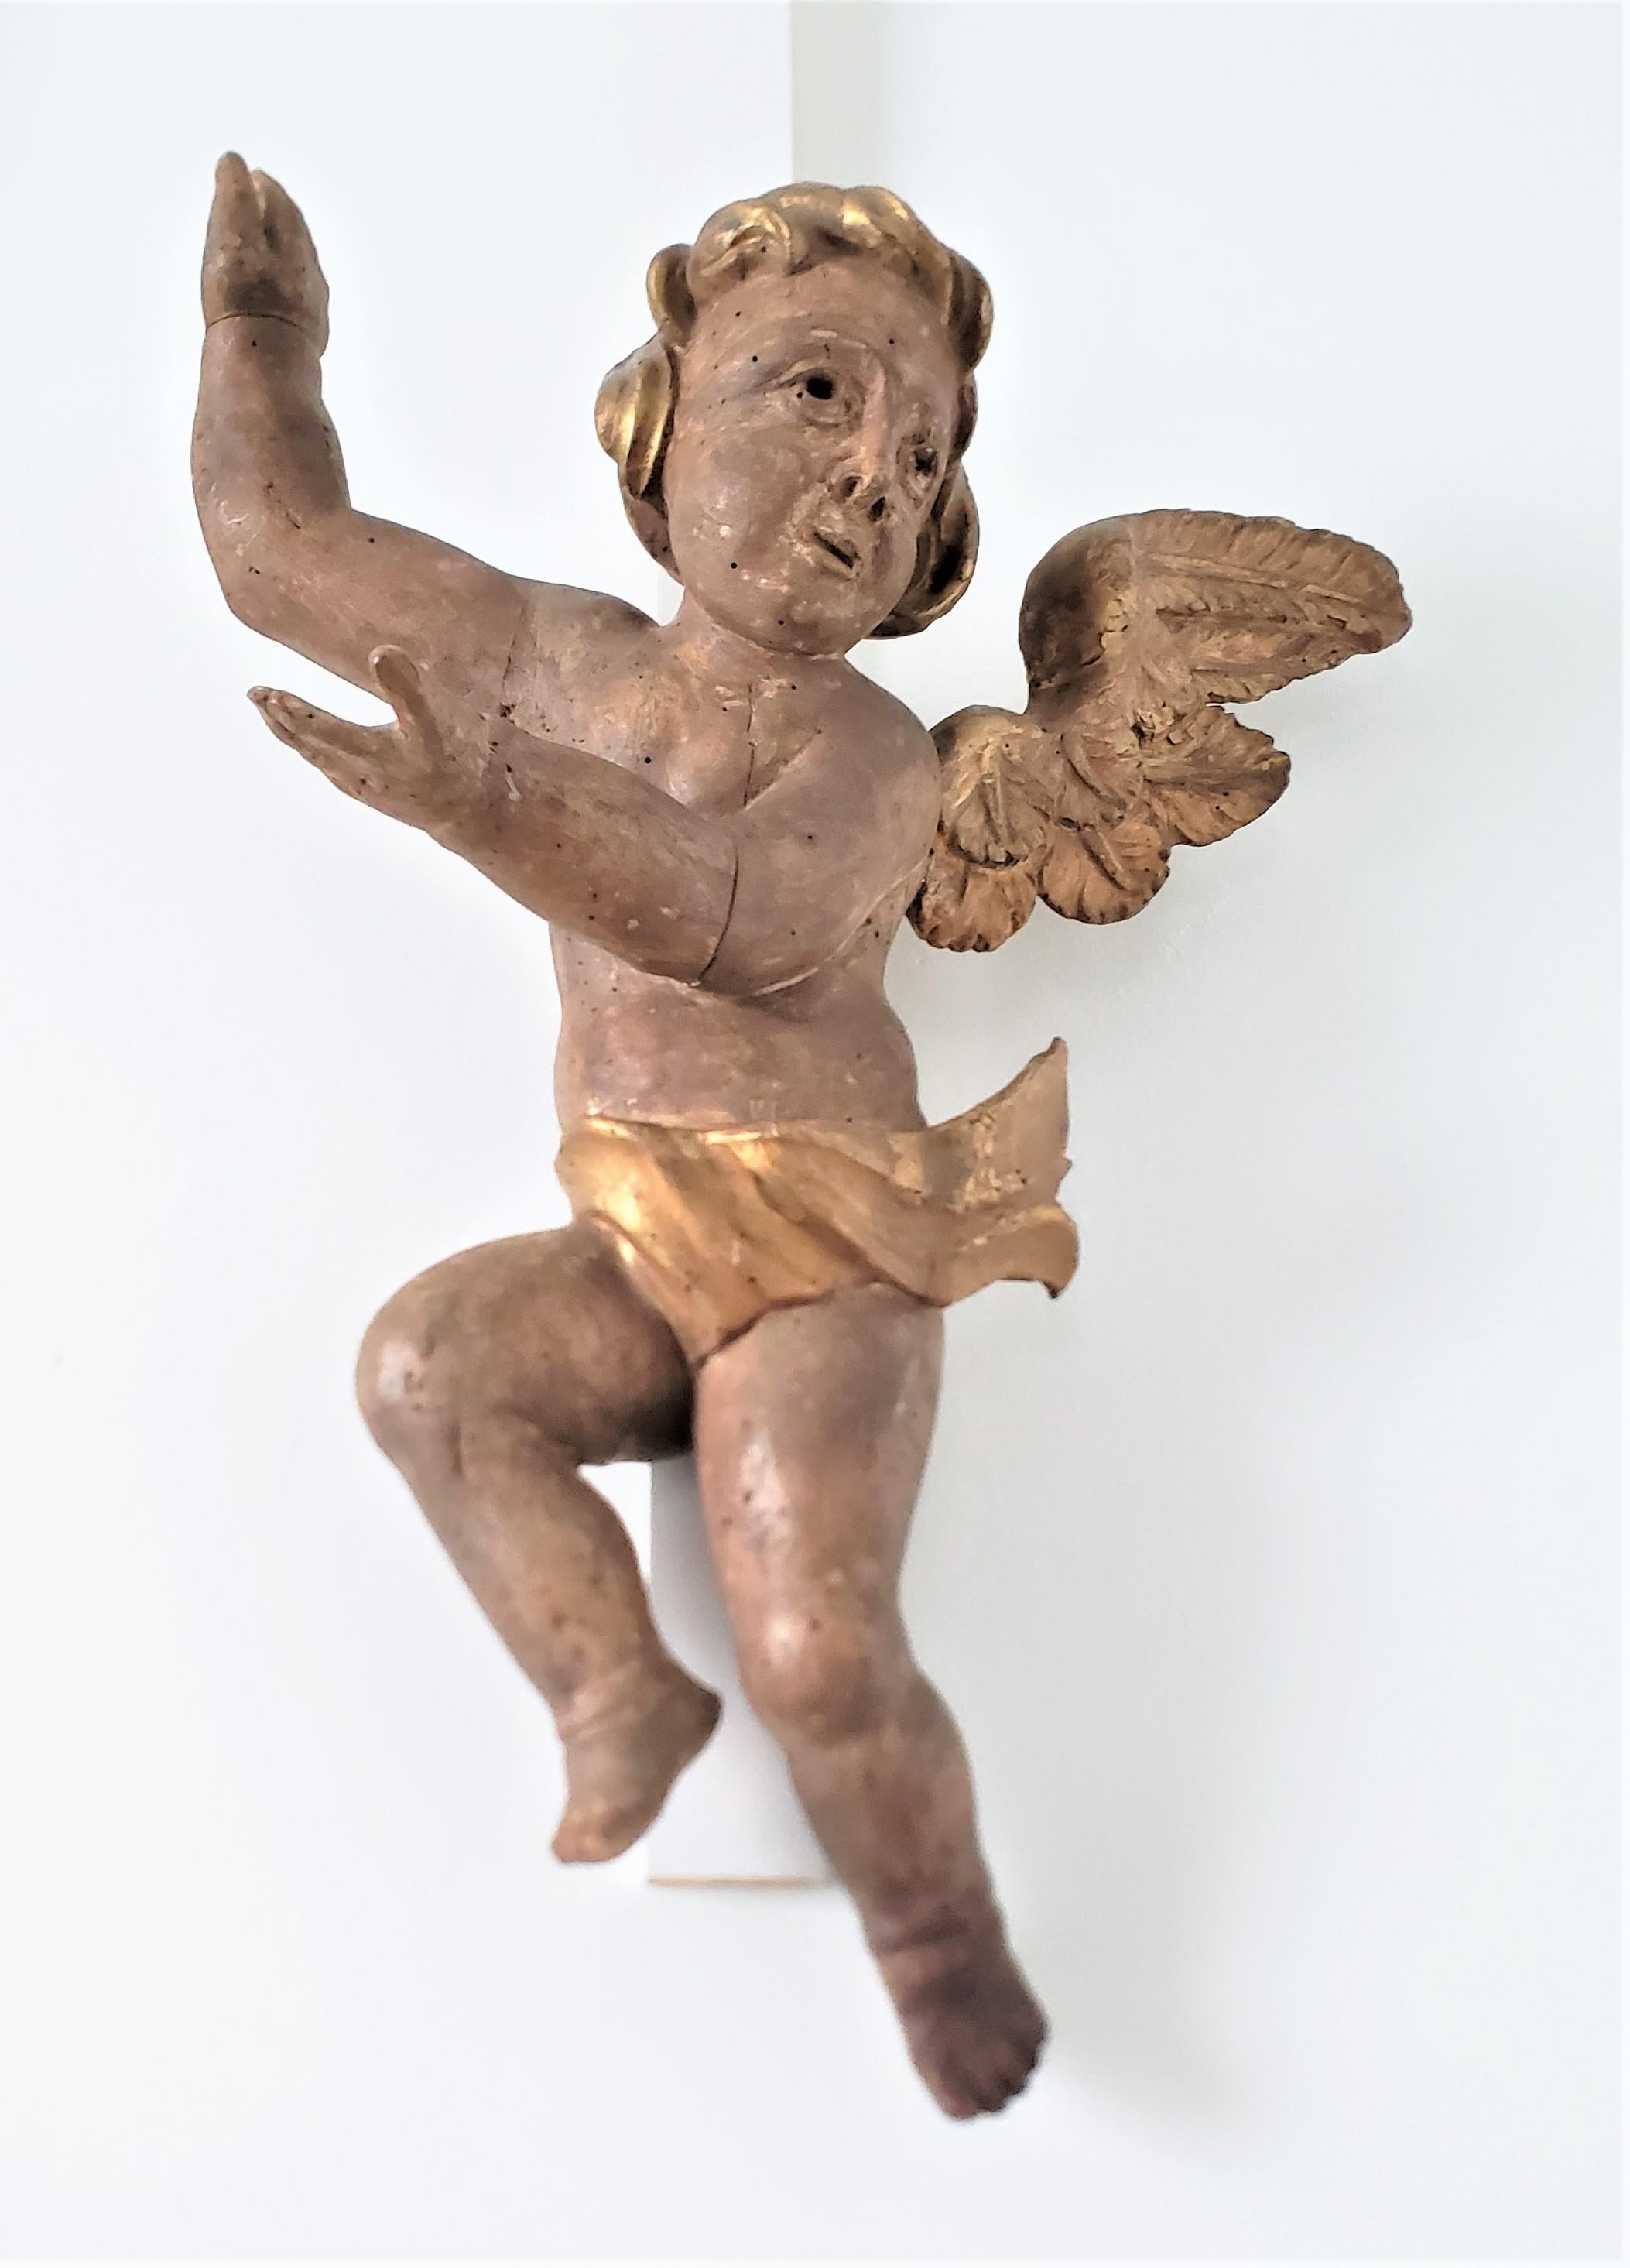 18th Century Large Antique Hand-Carved Wooden Cherub Architectural Element or Wall Sculpture For Sale